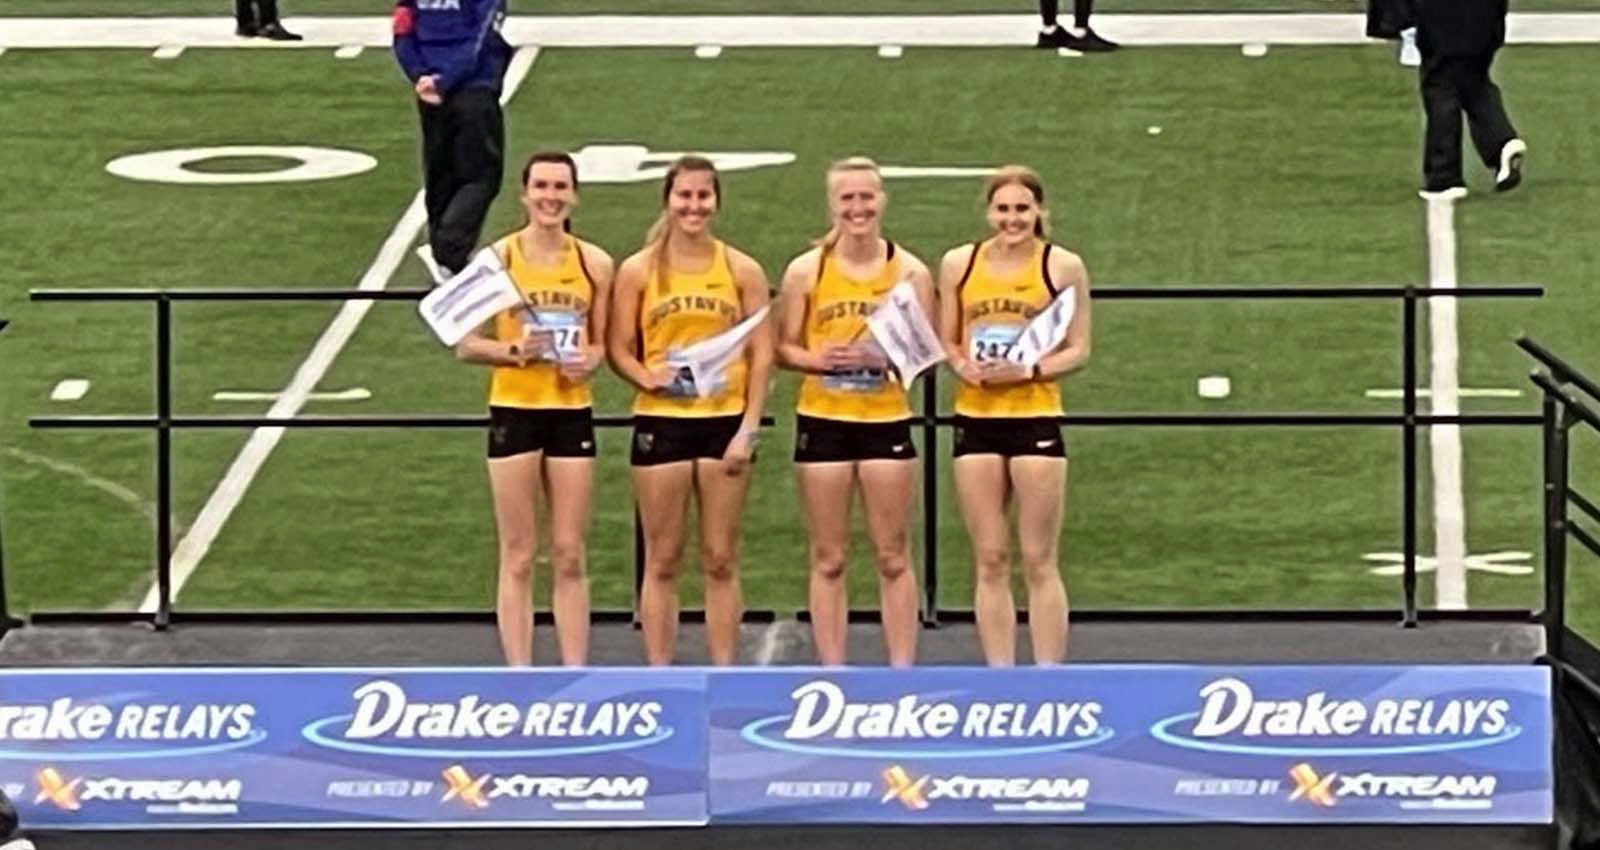 Women’s Track Wins Sprint Medley at Drake Relays Posted on April 29th